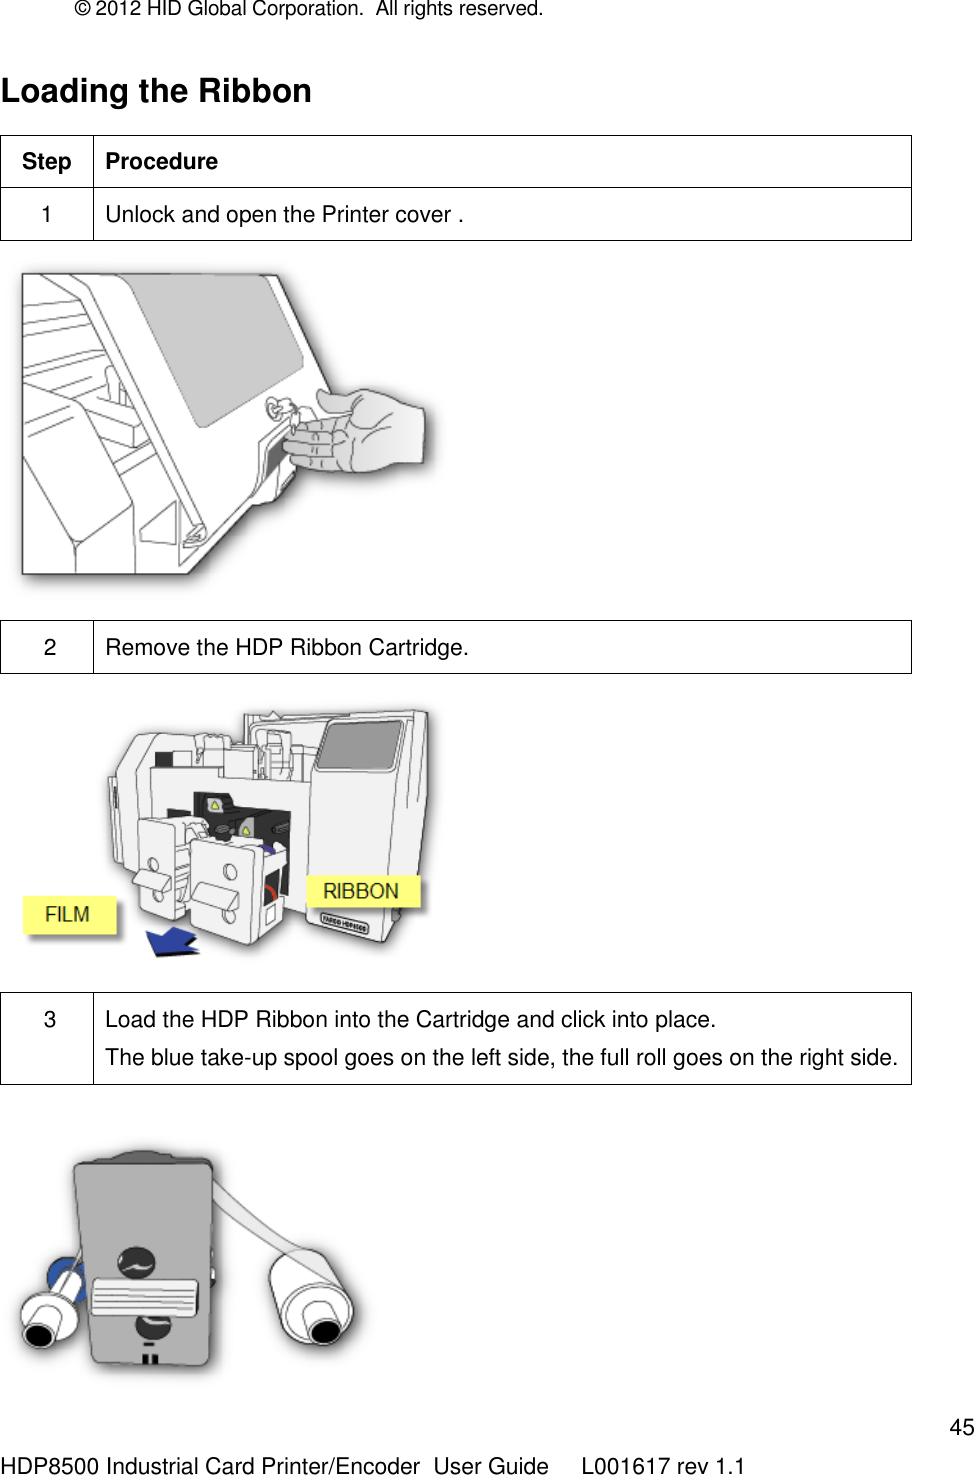 © 2012 HID Global Corporation.  All rights reserved.  45 HDP8500 Industrial Card Printer/Encoder  User Guide     L001617 rev 1.1 Loading the Ribbon  Step Procedure 1 Unlock and open the Printer cover .   2 Remove the HDP Ribbon Cartridge.    3 Load the HDP Ribbon into the Cartridge and click into place. The blue take-up spool goes on the left side, the full roll goes on the right side.    